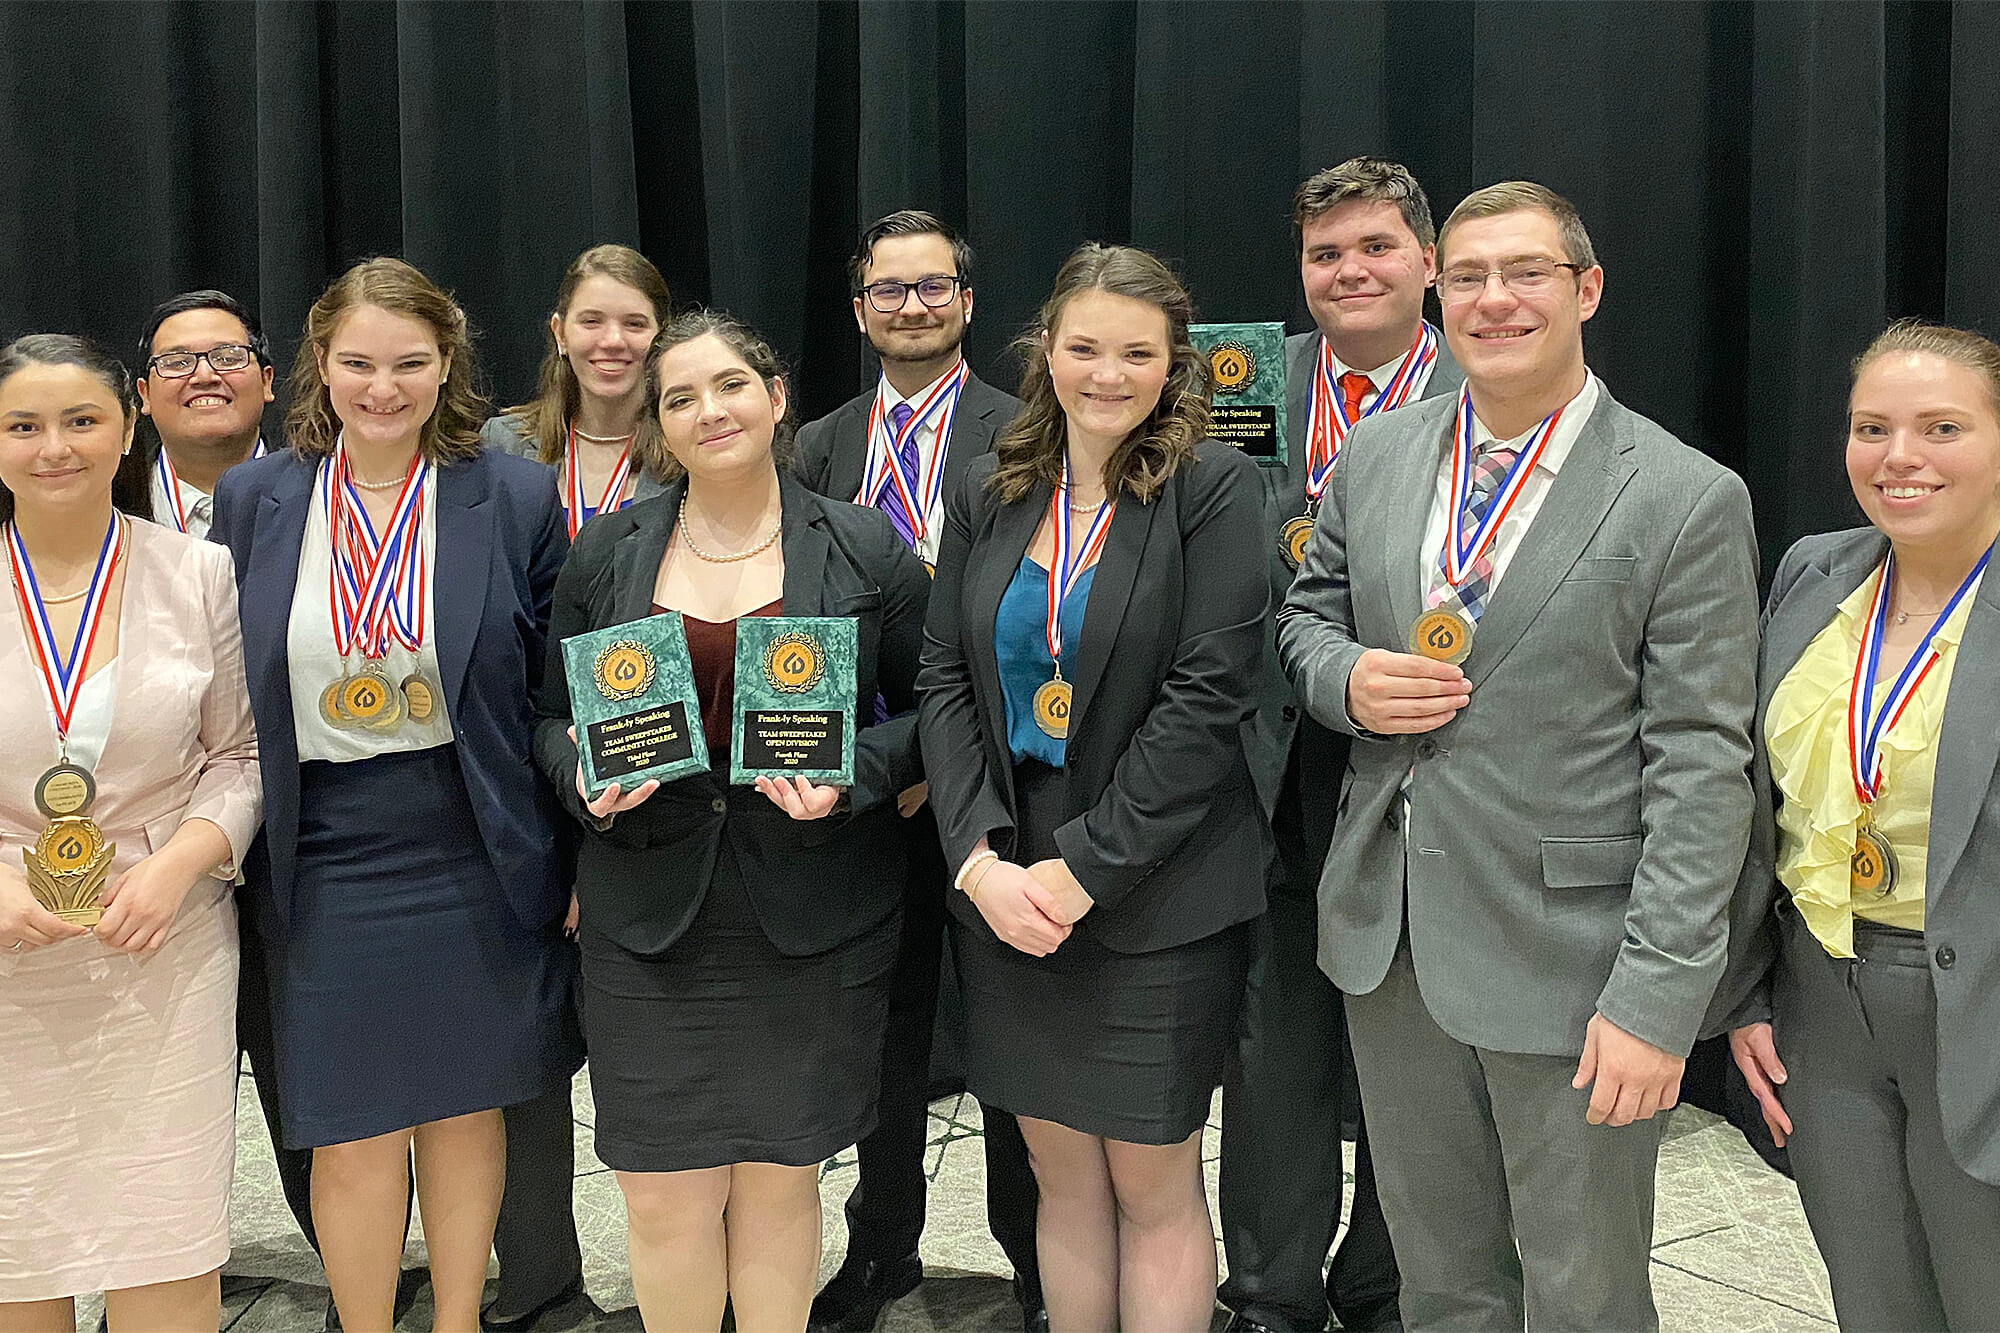 Photograph of debate teams with awards from DuPage College debate tournament.